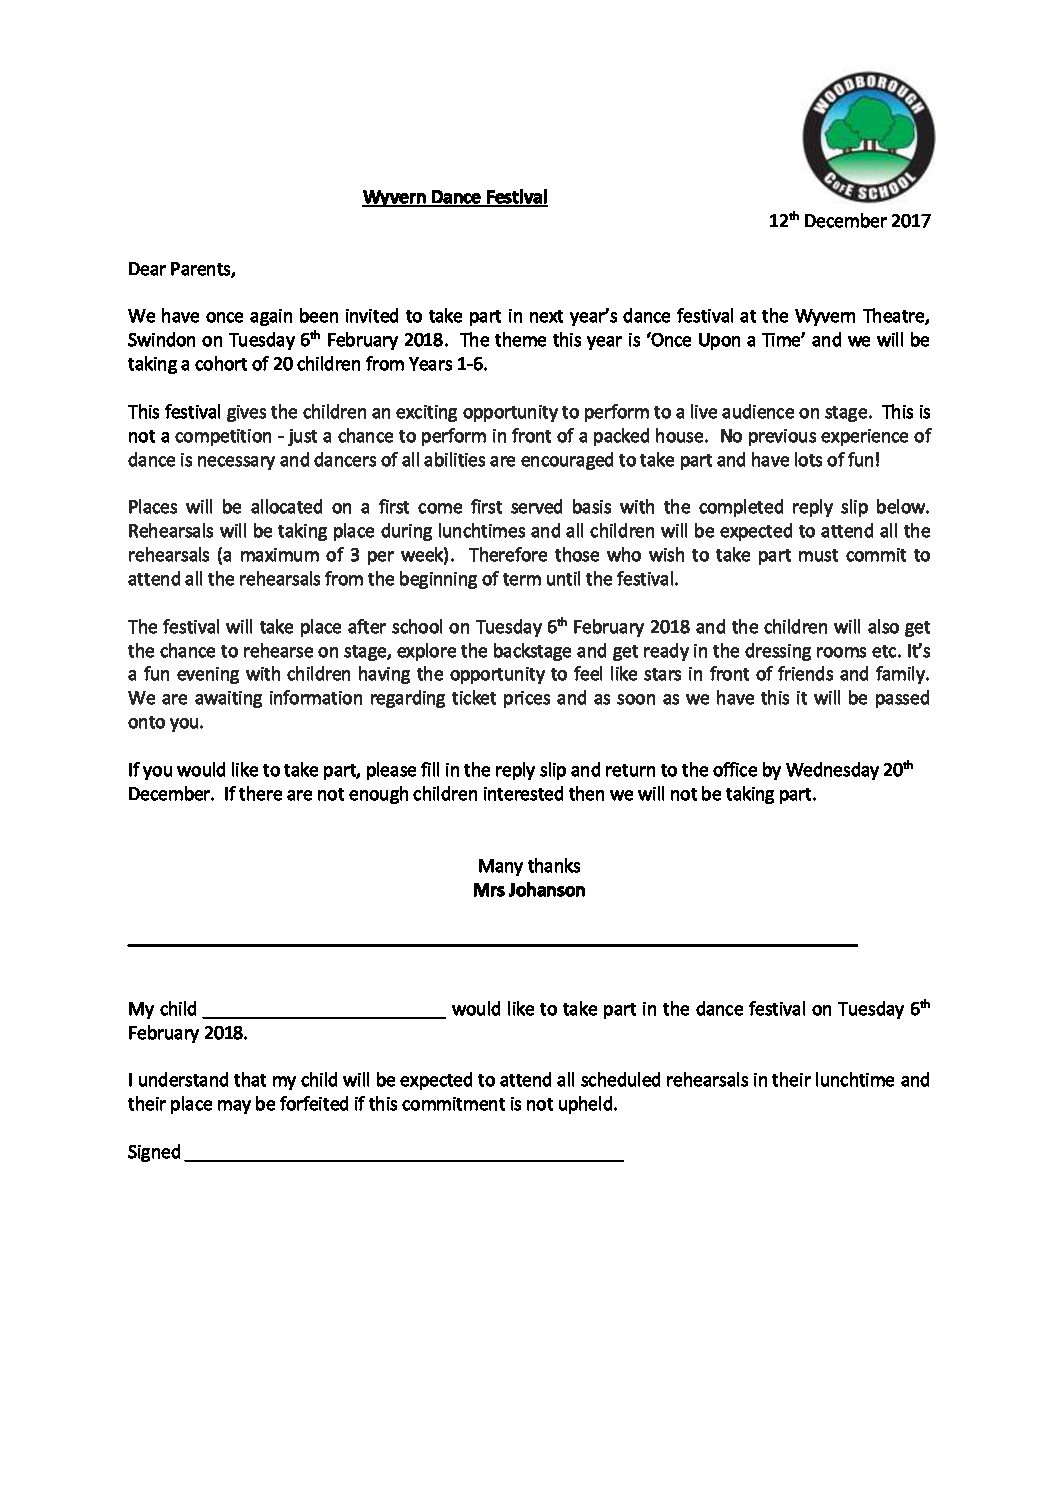 Wyvern Dance Festival letter to parents - 12 12 17 - Woodborough ...